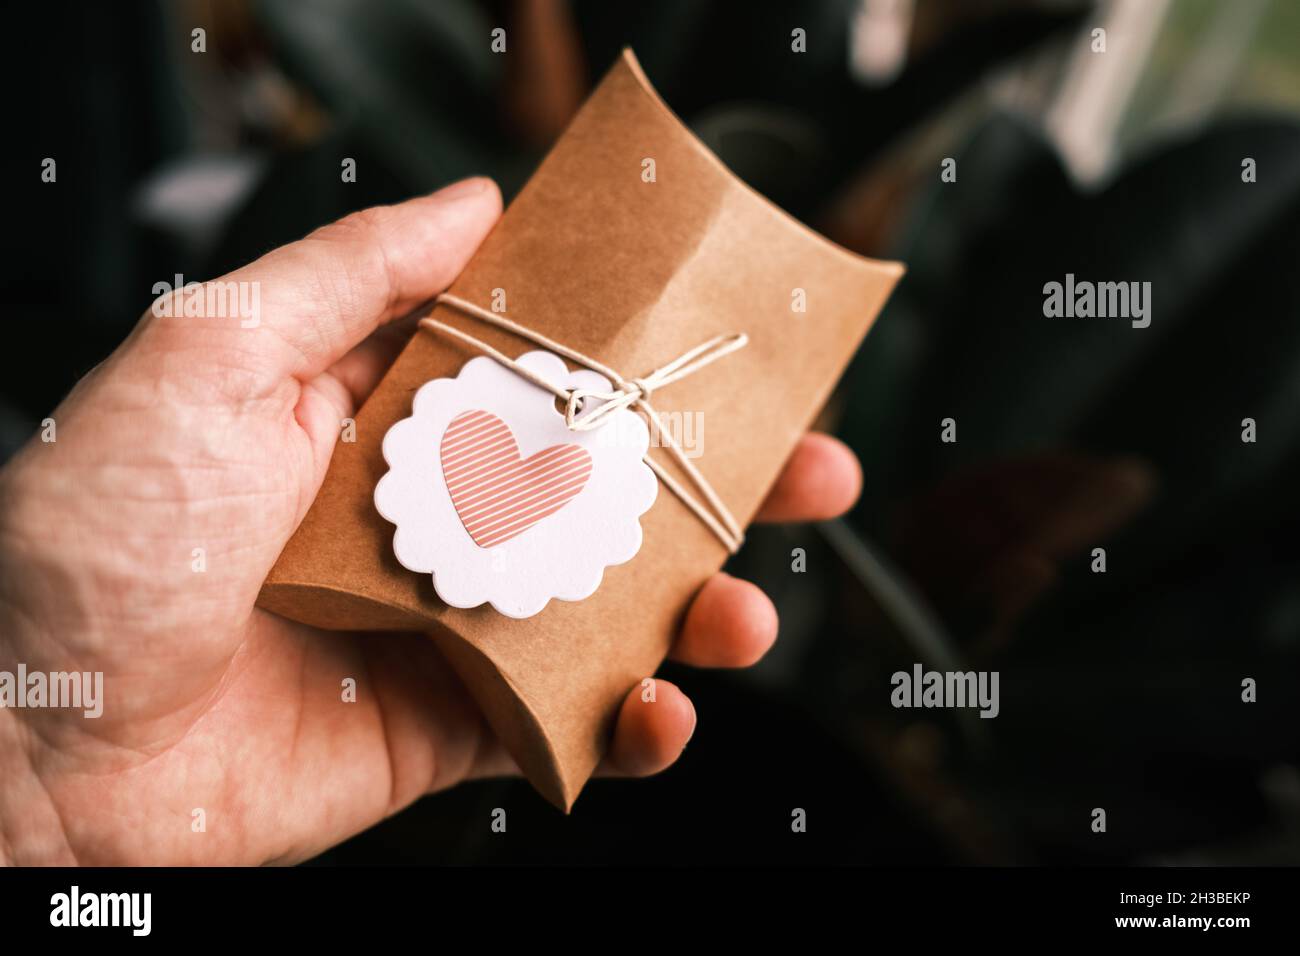 Male hand holding small gift wrapped in craft paper on dark green background. Homemade present, heart shape on gift label. Sustainable gift wrapping. Stock Photo